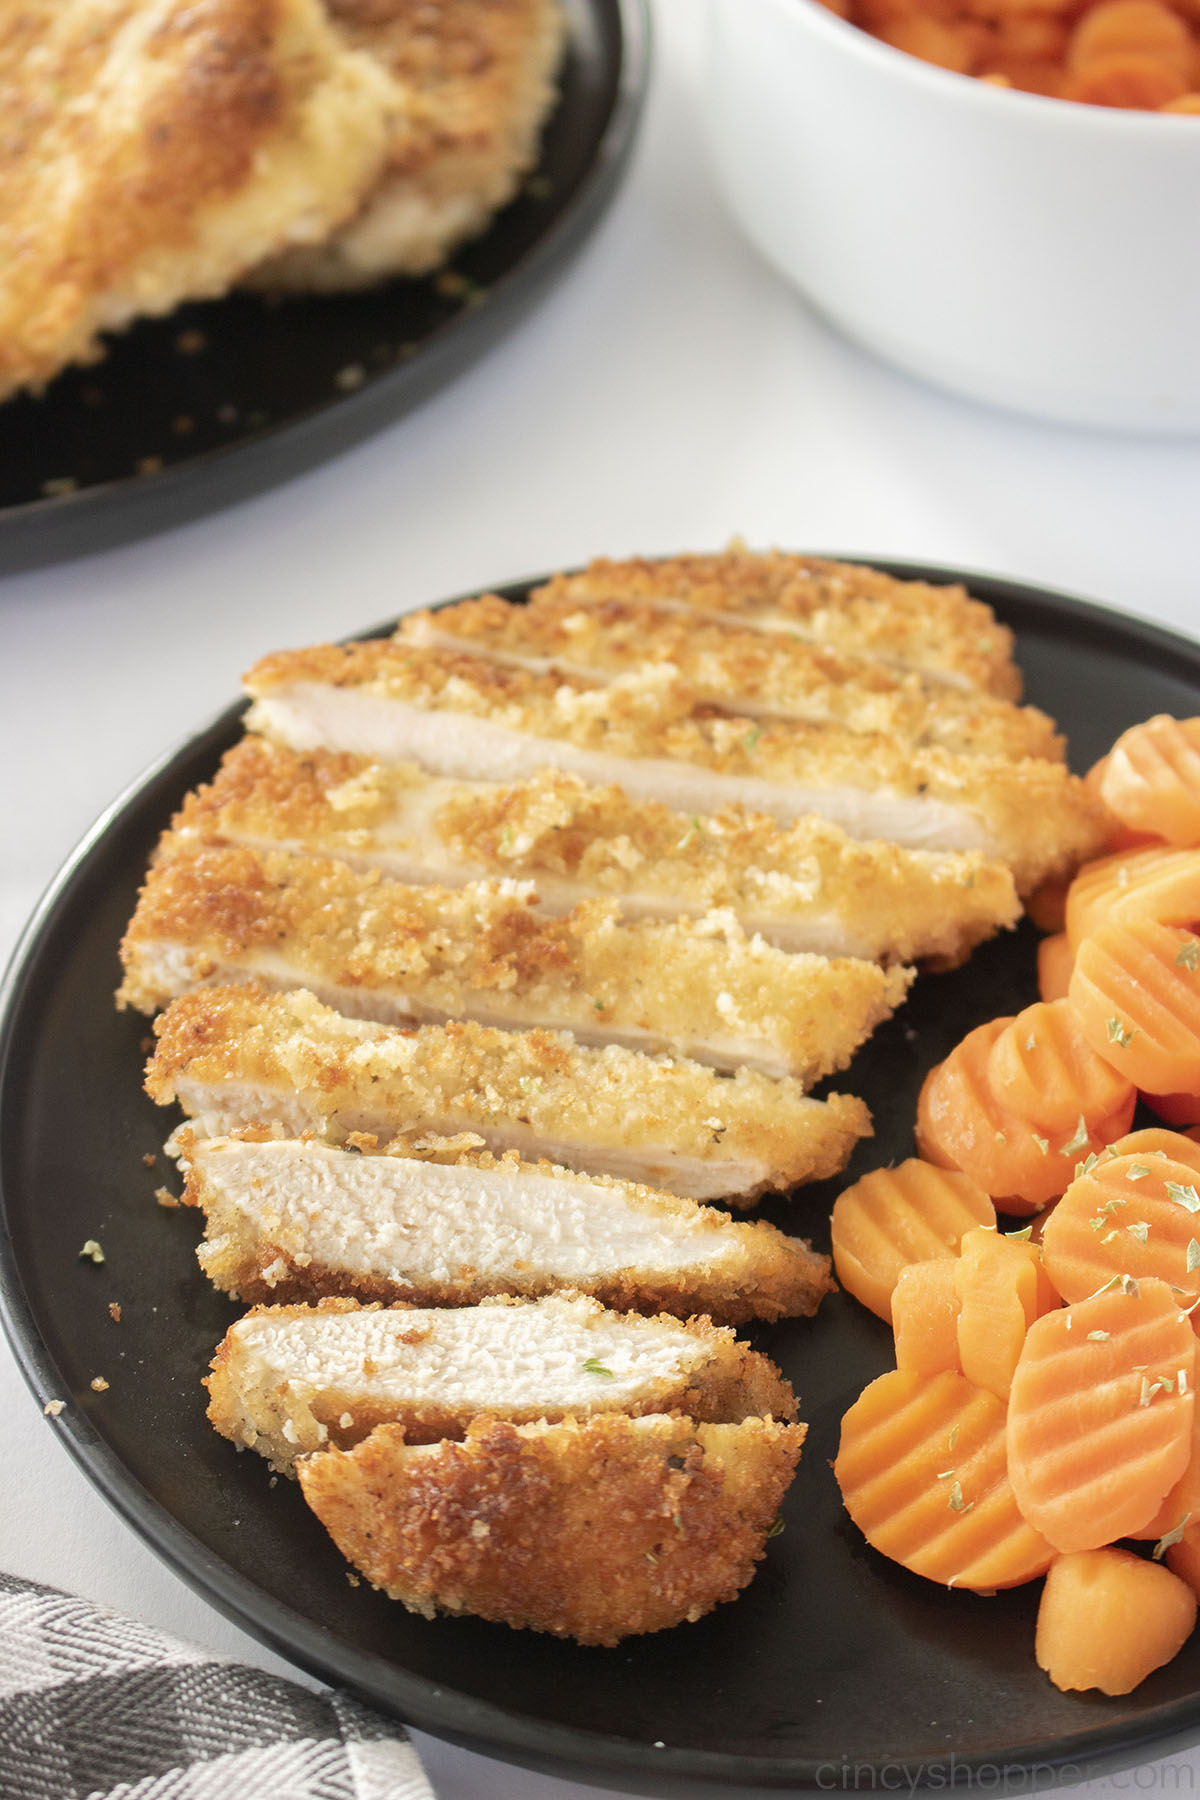 Panko chicken cut in slices on a black plate with carrots.